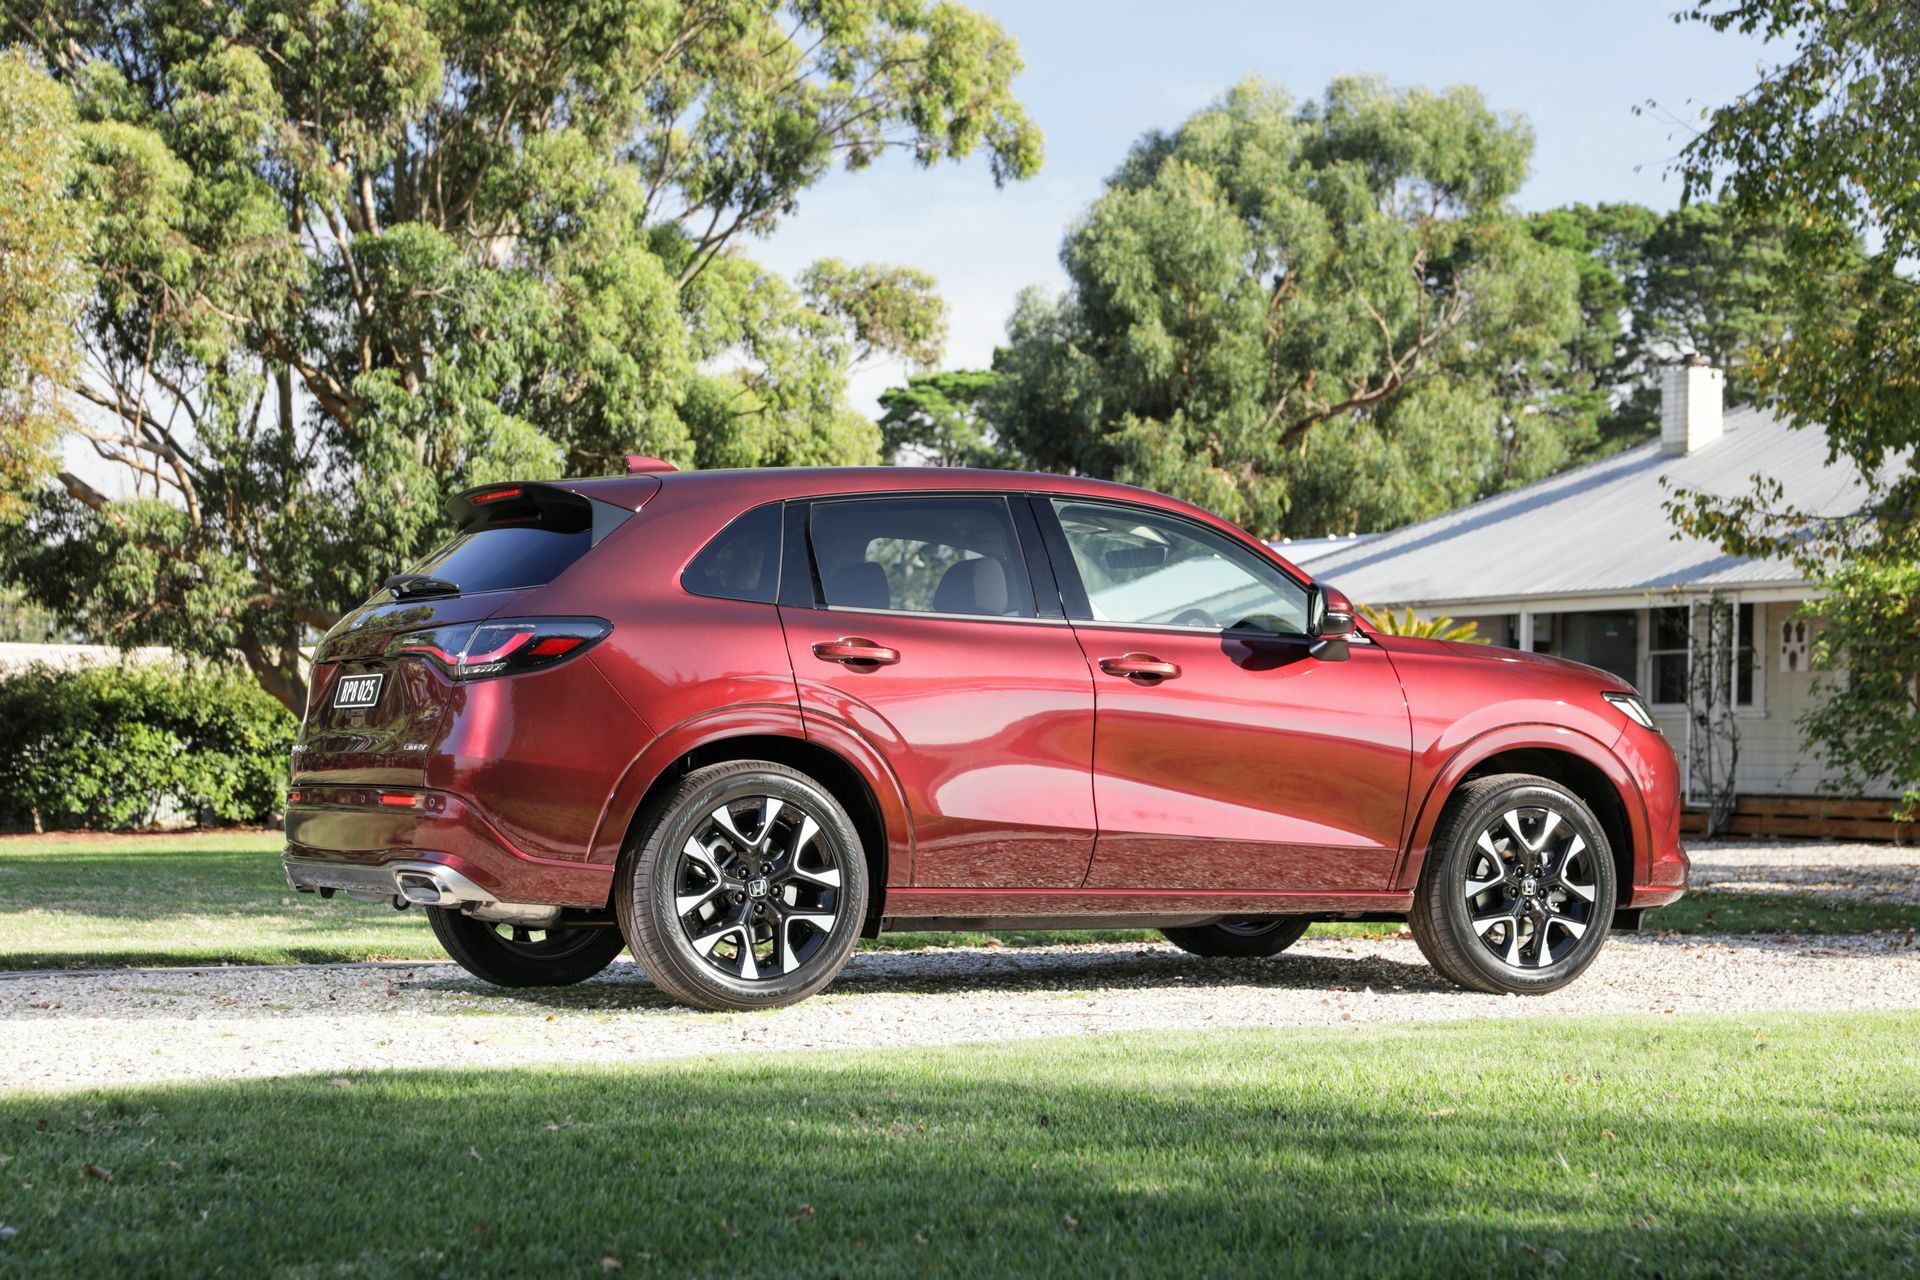 The Honda ZR-V  What You Need To Know About the CR-V Successor